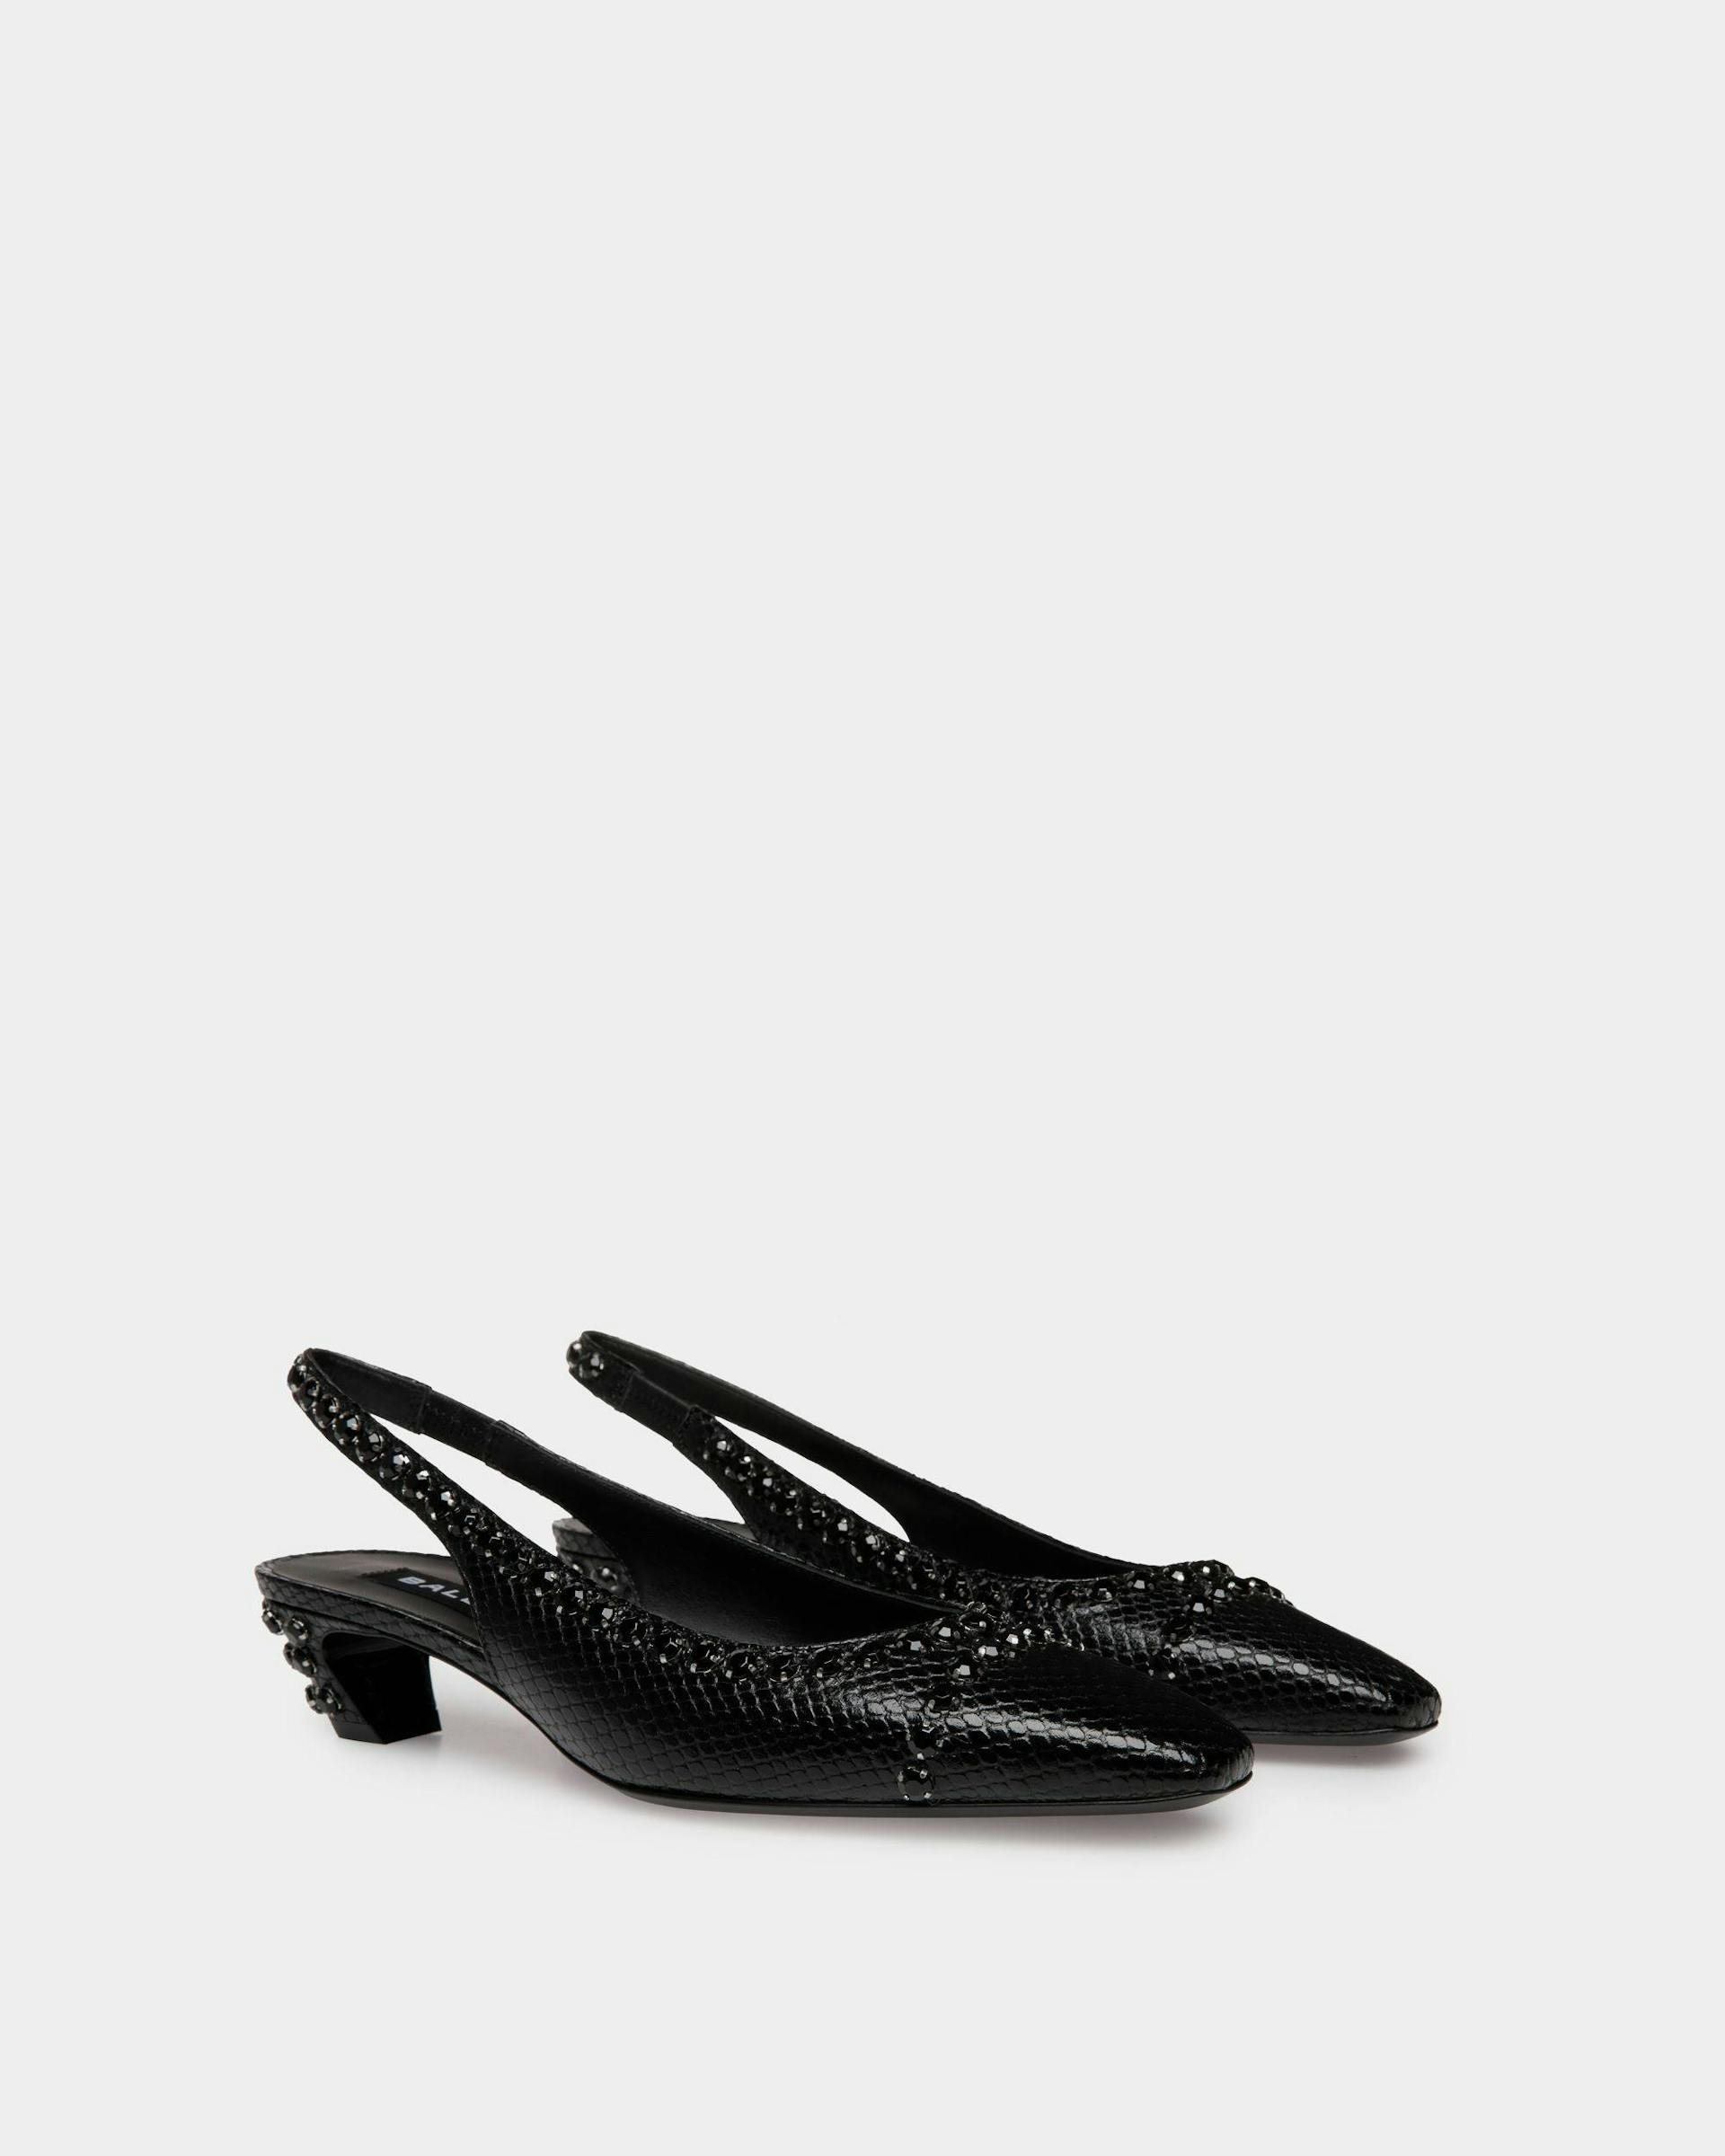 Women's Sylt Slingback Pump in Black Python Printed Leather | Bally | Still Life 3/4 Front